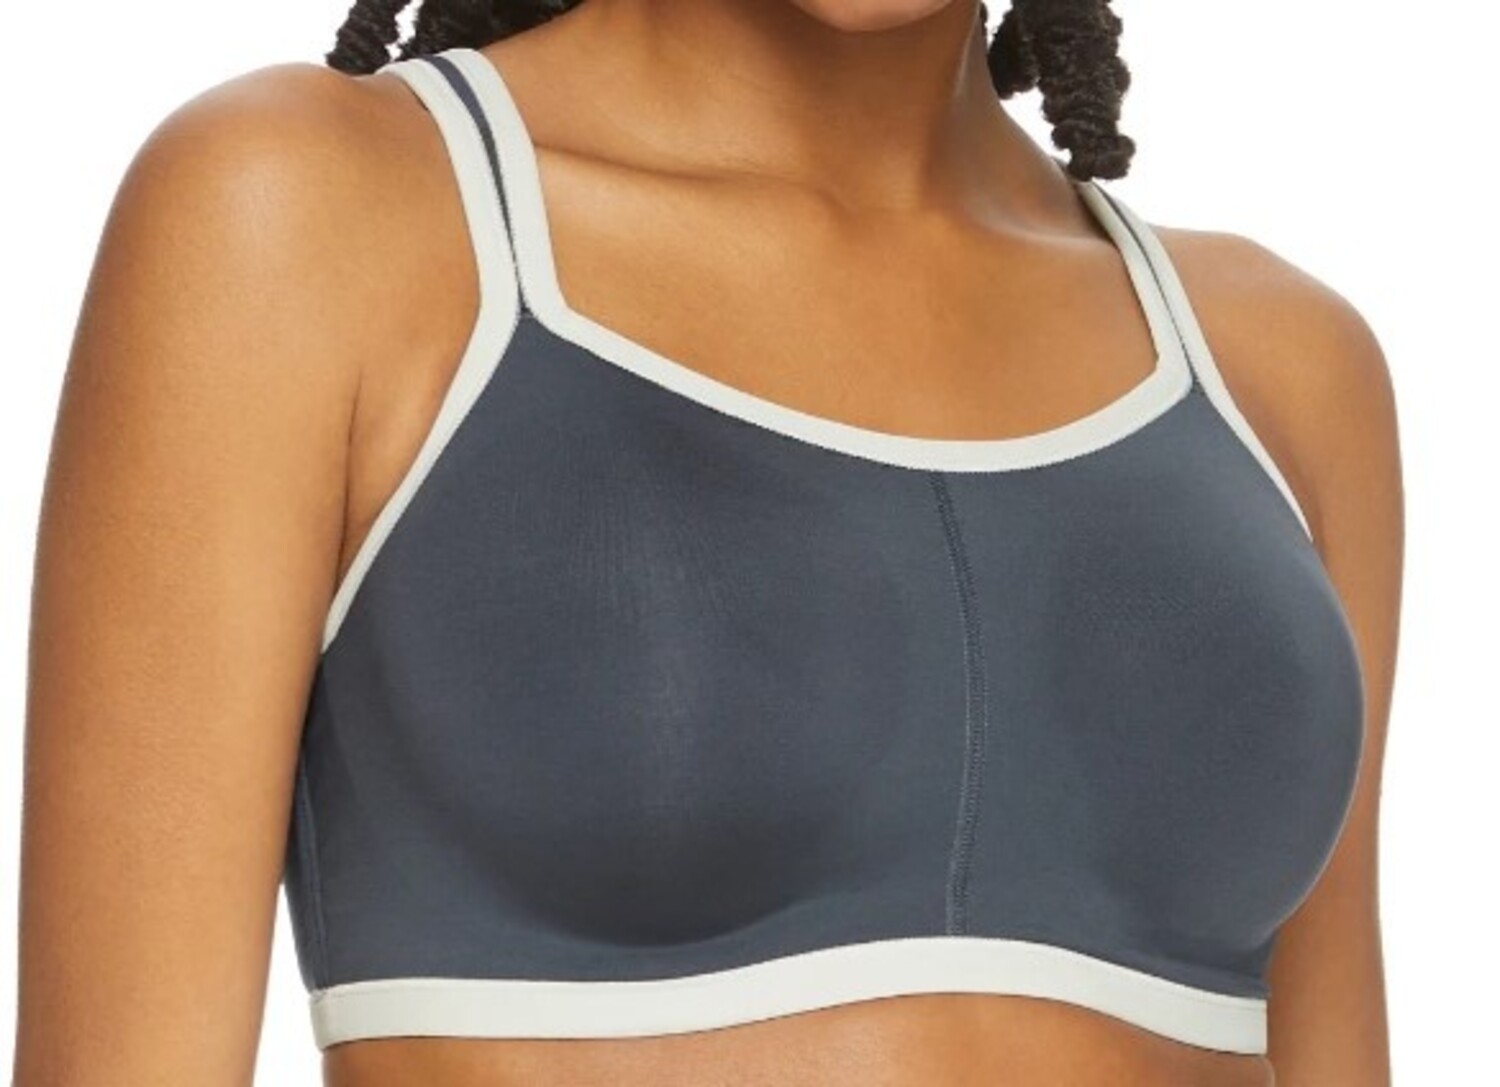 Everyday Yoga Girl's Wholesome Tribe Sports Bra at YogaOutlet.com